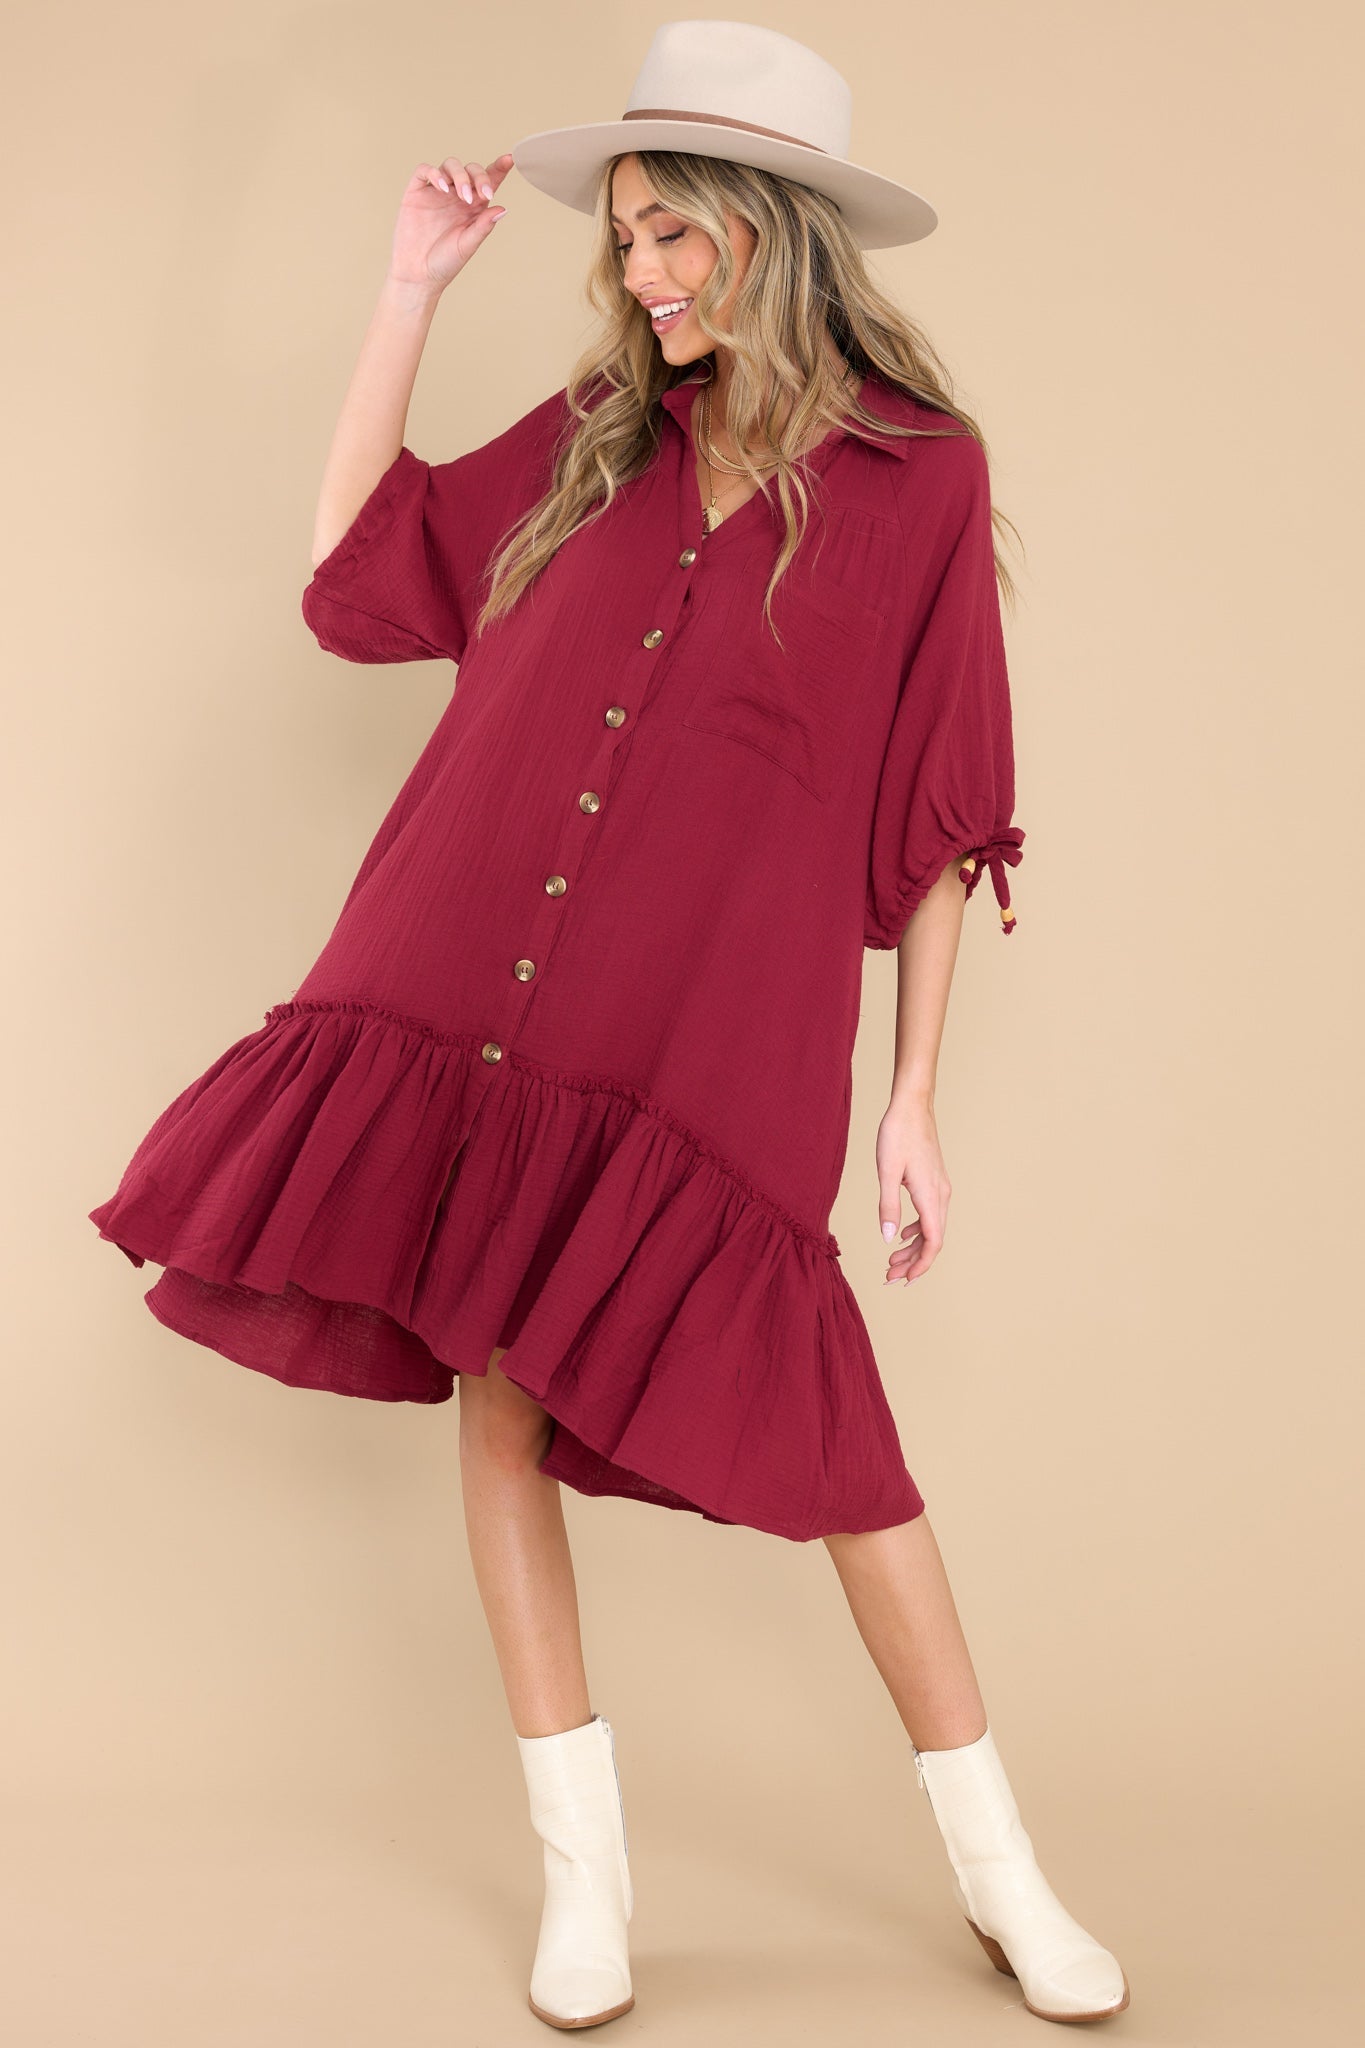 Fairytale Song Berry Midi Dress - Red Dress